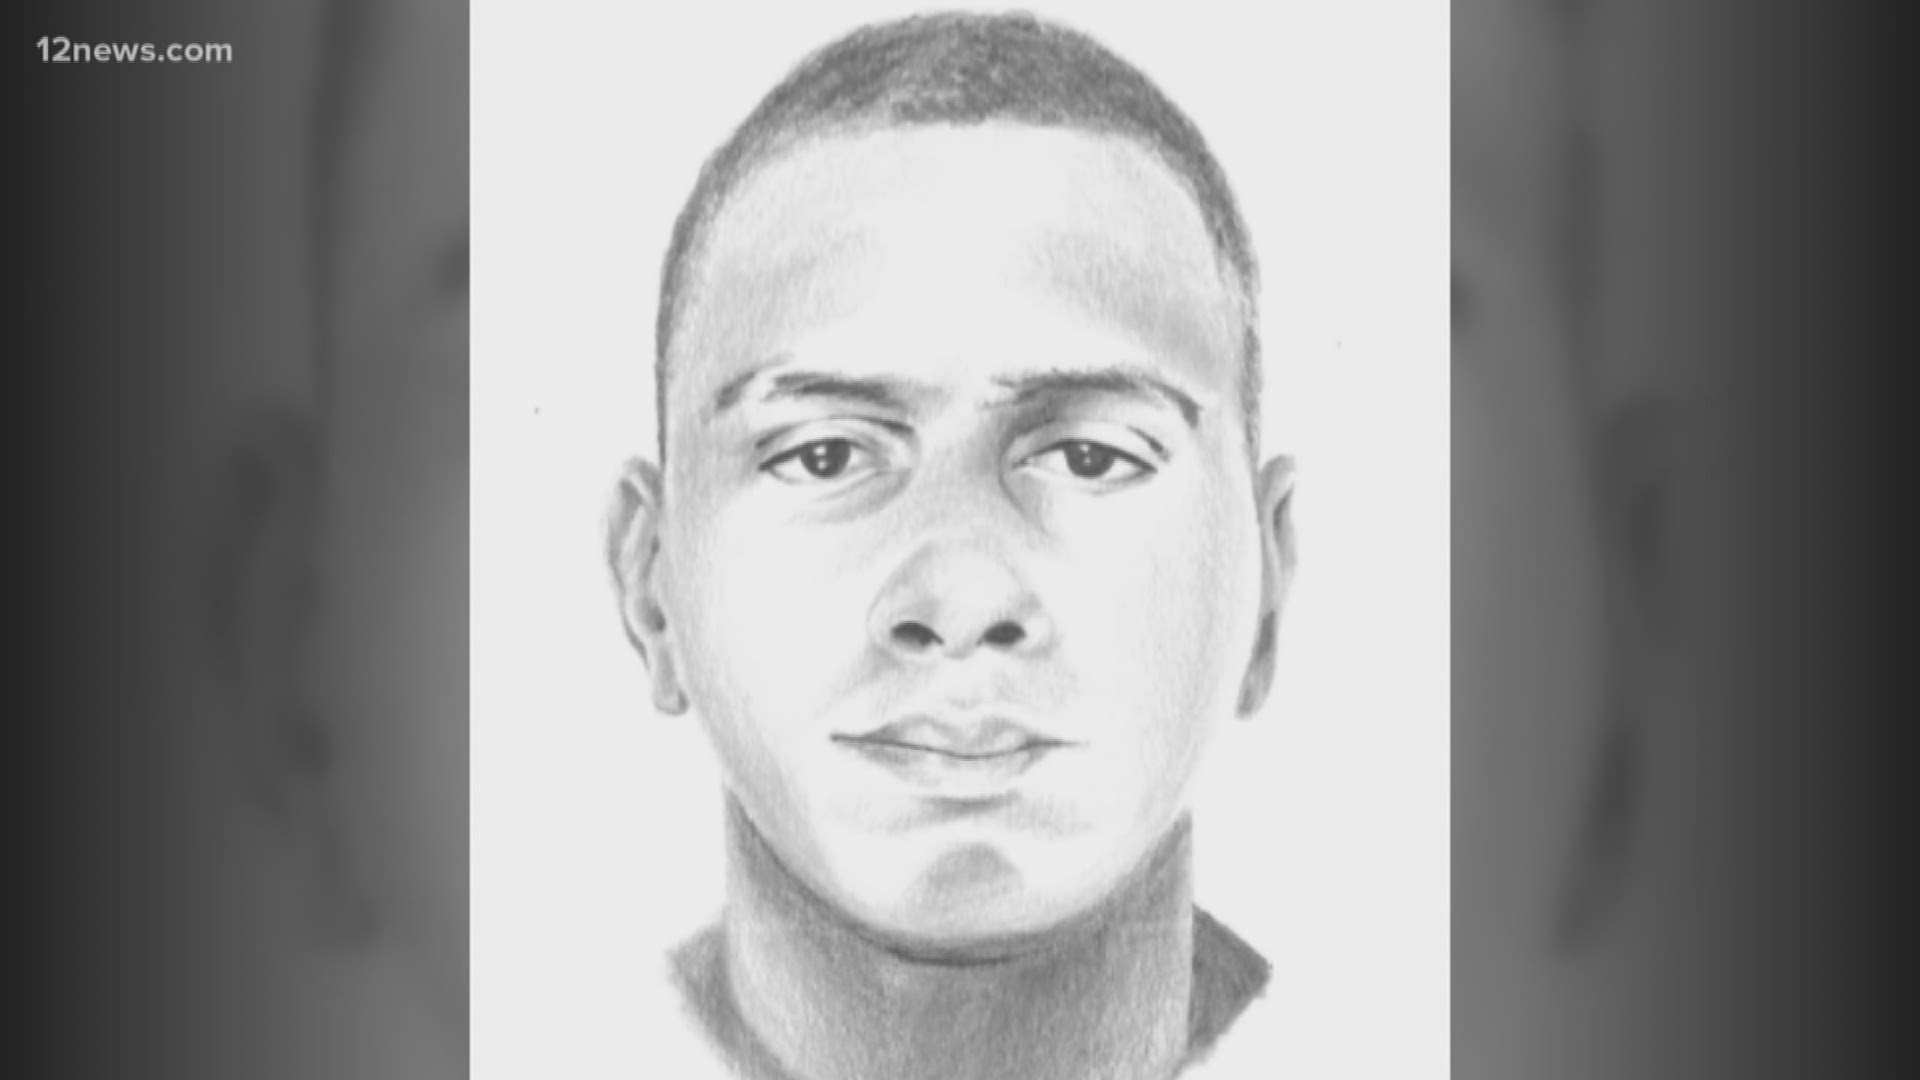 According police, the man tried to kidnap a victim near Hardy Drive and Brown Street around 3 a.m. Saturday.